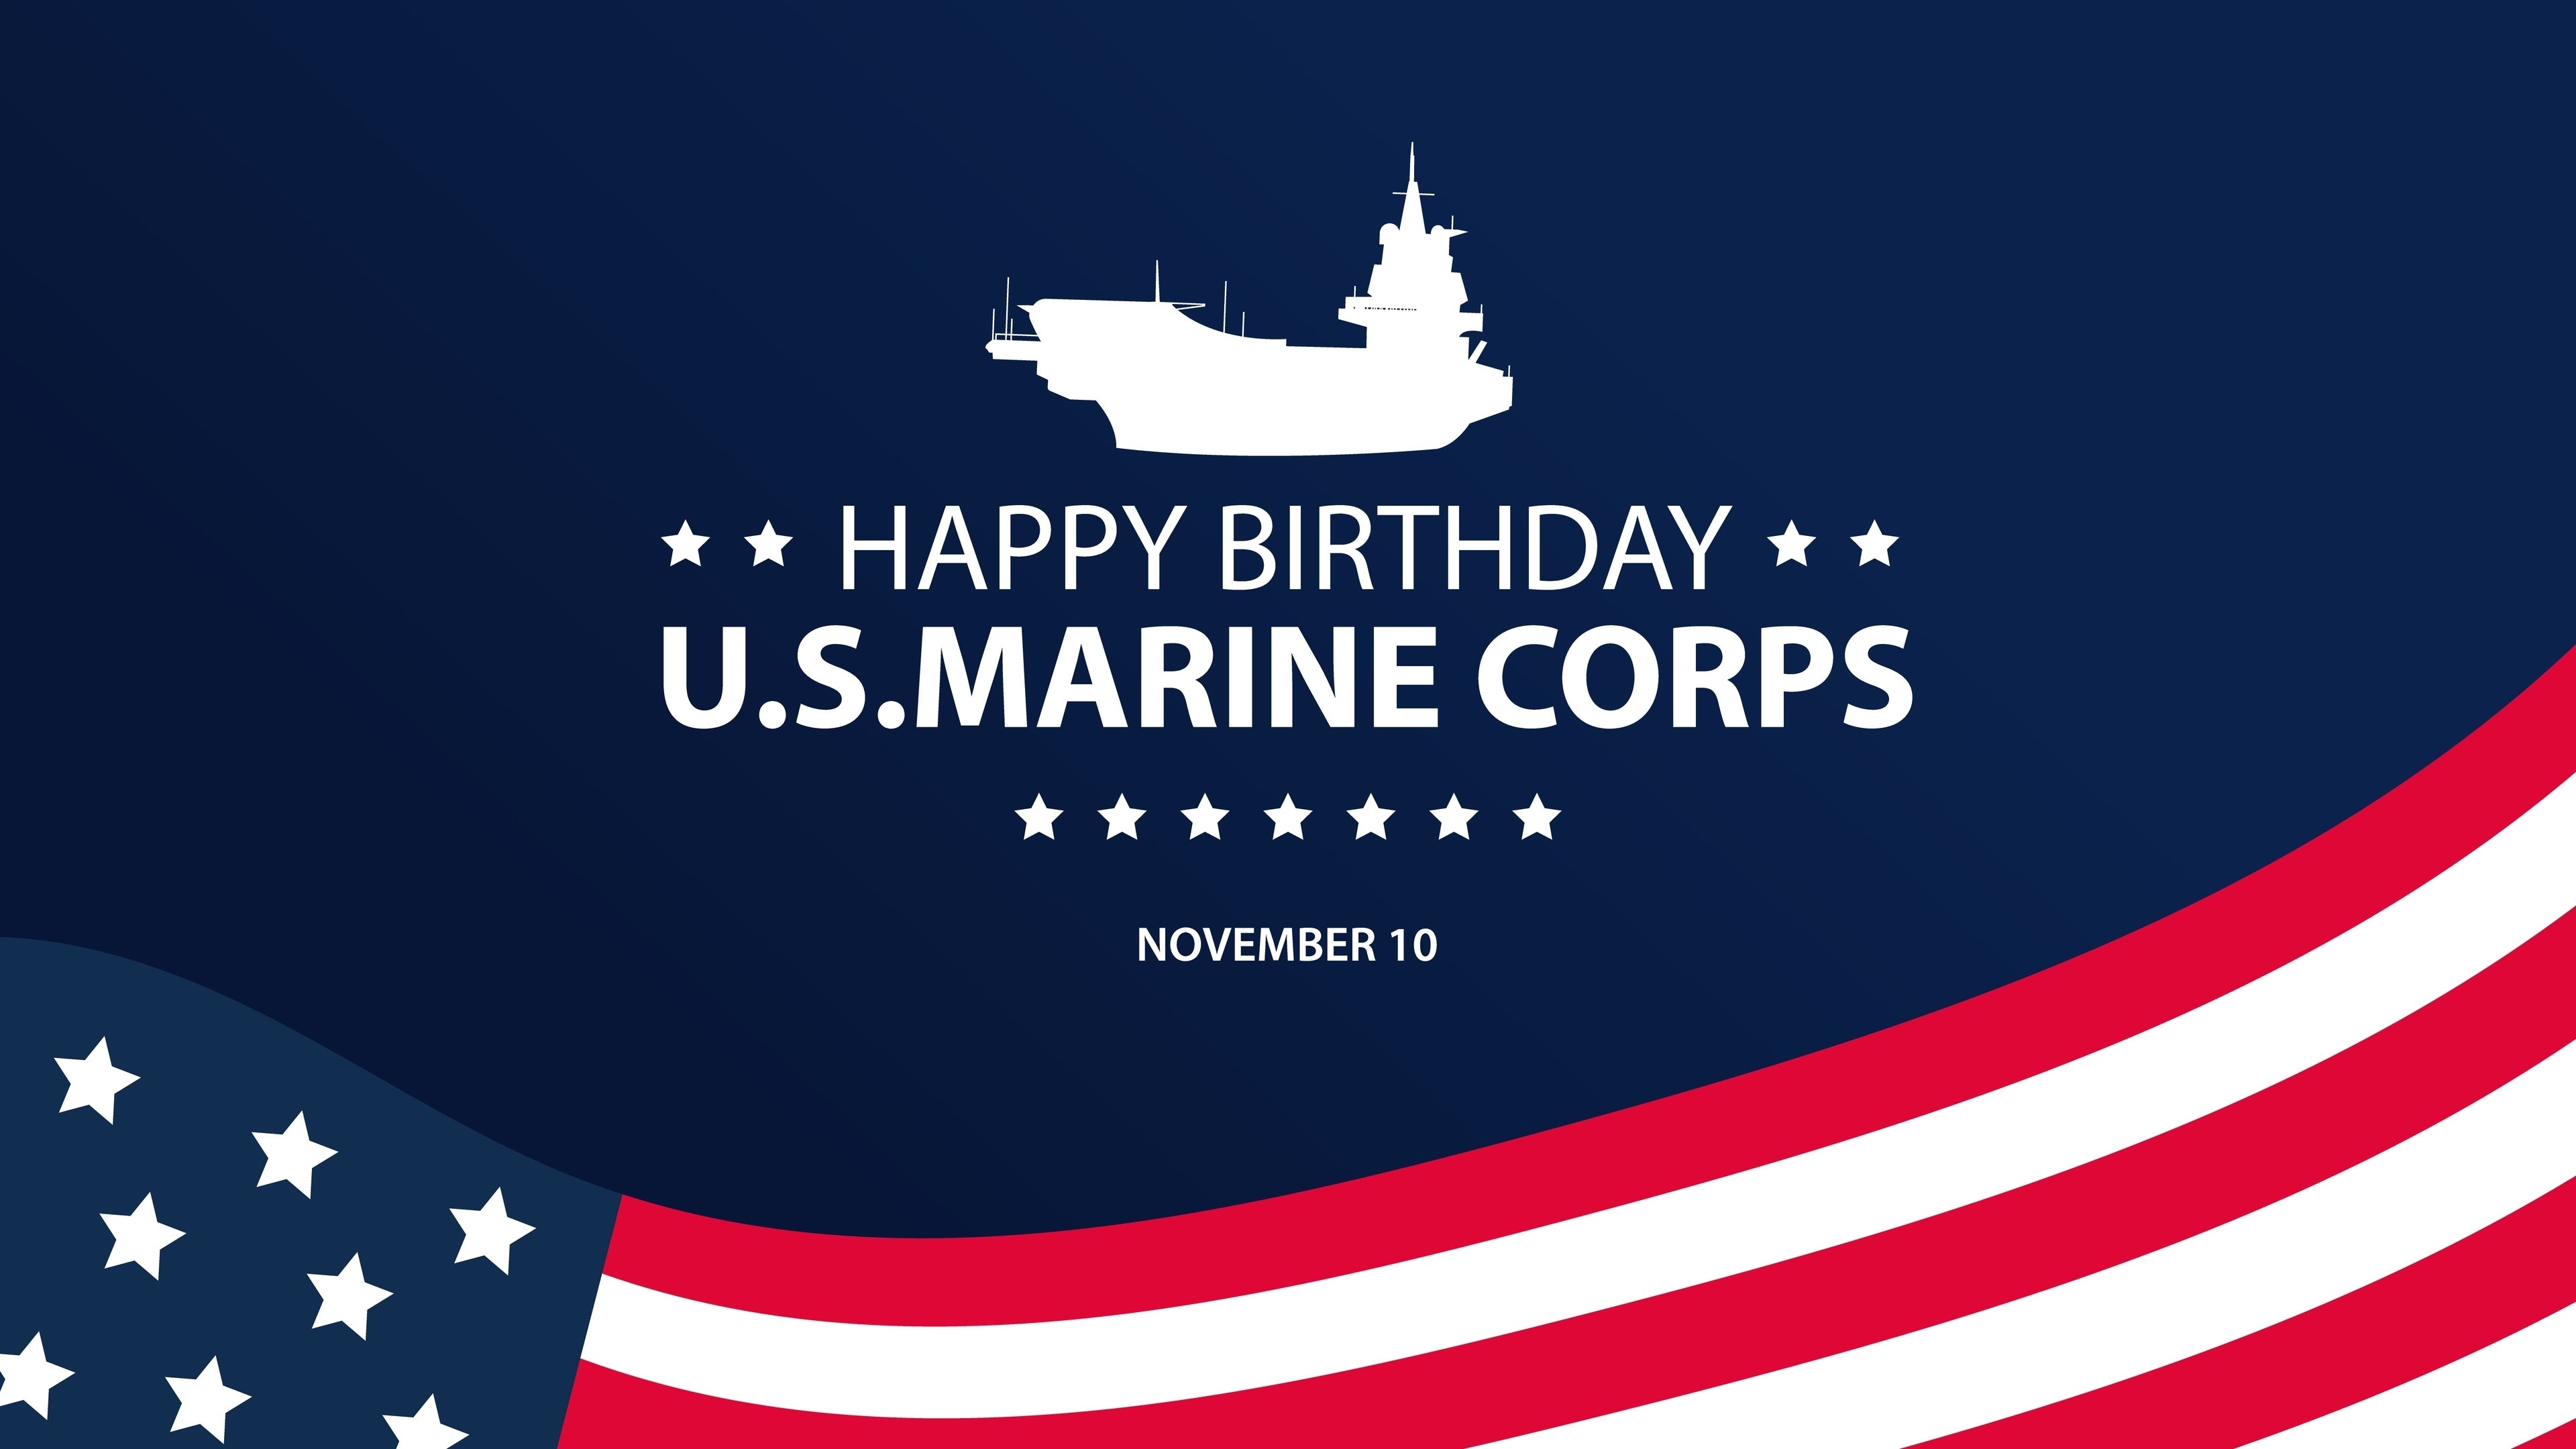 The History of the Marine Corps Annual Birthday Celebration